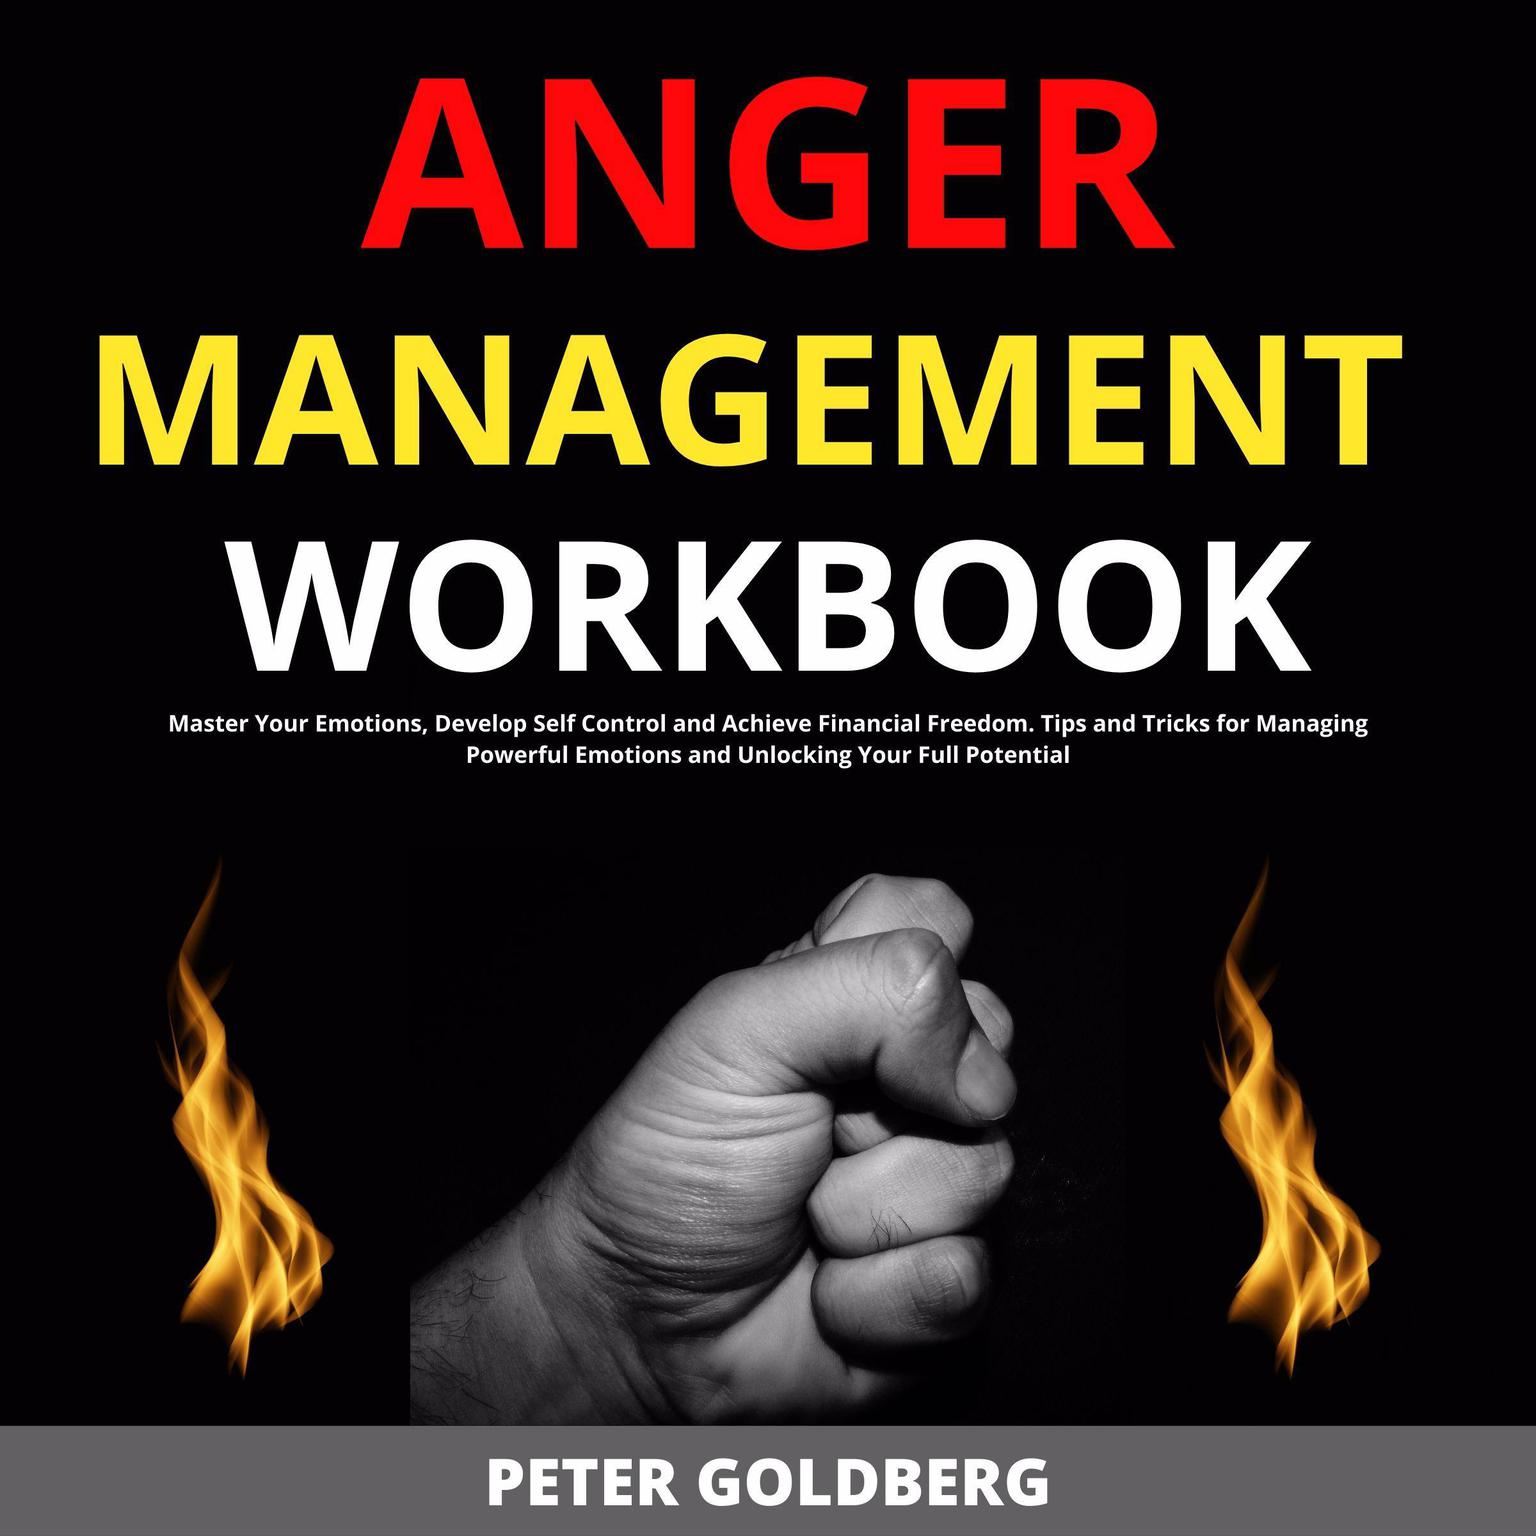 Anger Management Workbook: Master Your Emotions, Develop Self Control and Achieve Financial Freedom. Tips and Tricks for Managing Powerful Emotions and Unlocking Your Full Potential Audiobook, by Peter Goldberg